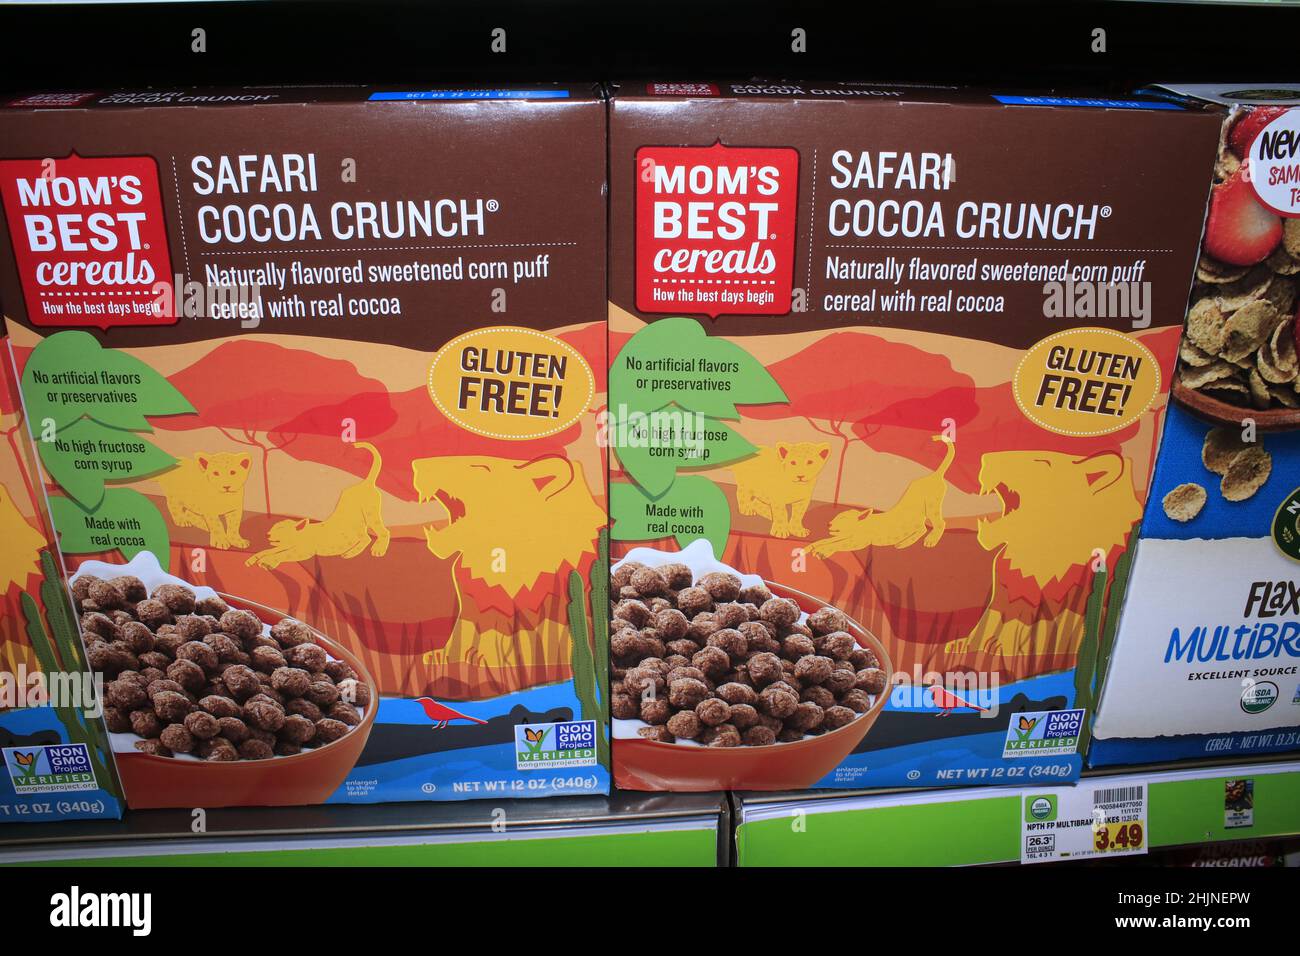 A closeup shot of MOM'S BEST cereals  SAFARI COCOA CRUNCH that's bright and colorful at a Dillons store in Kansas Stock Photo